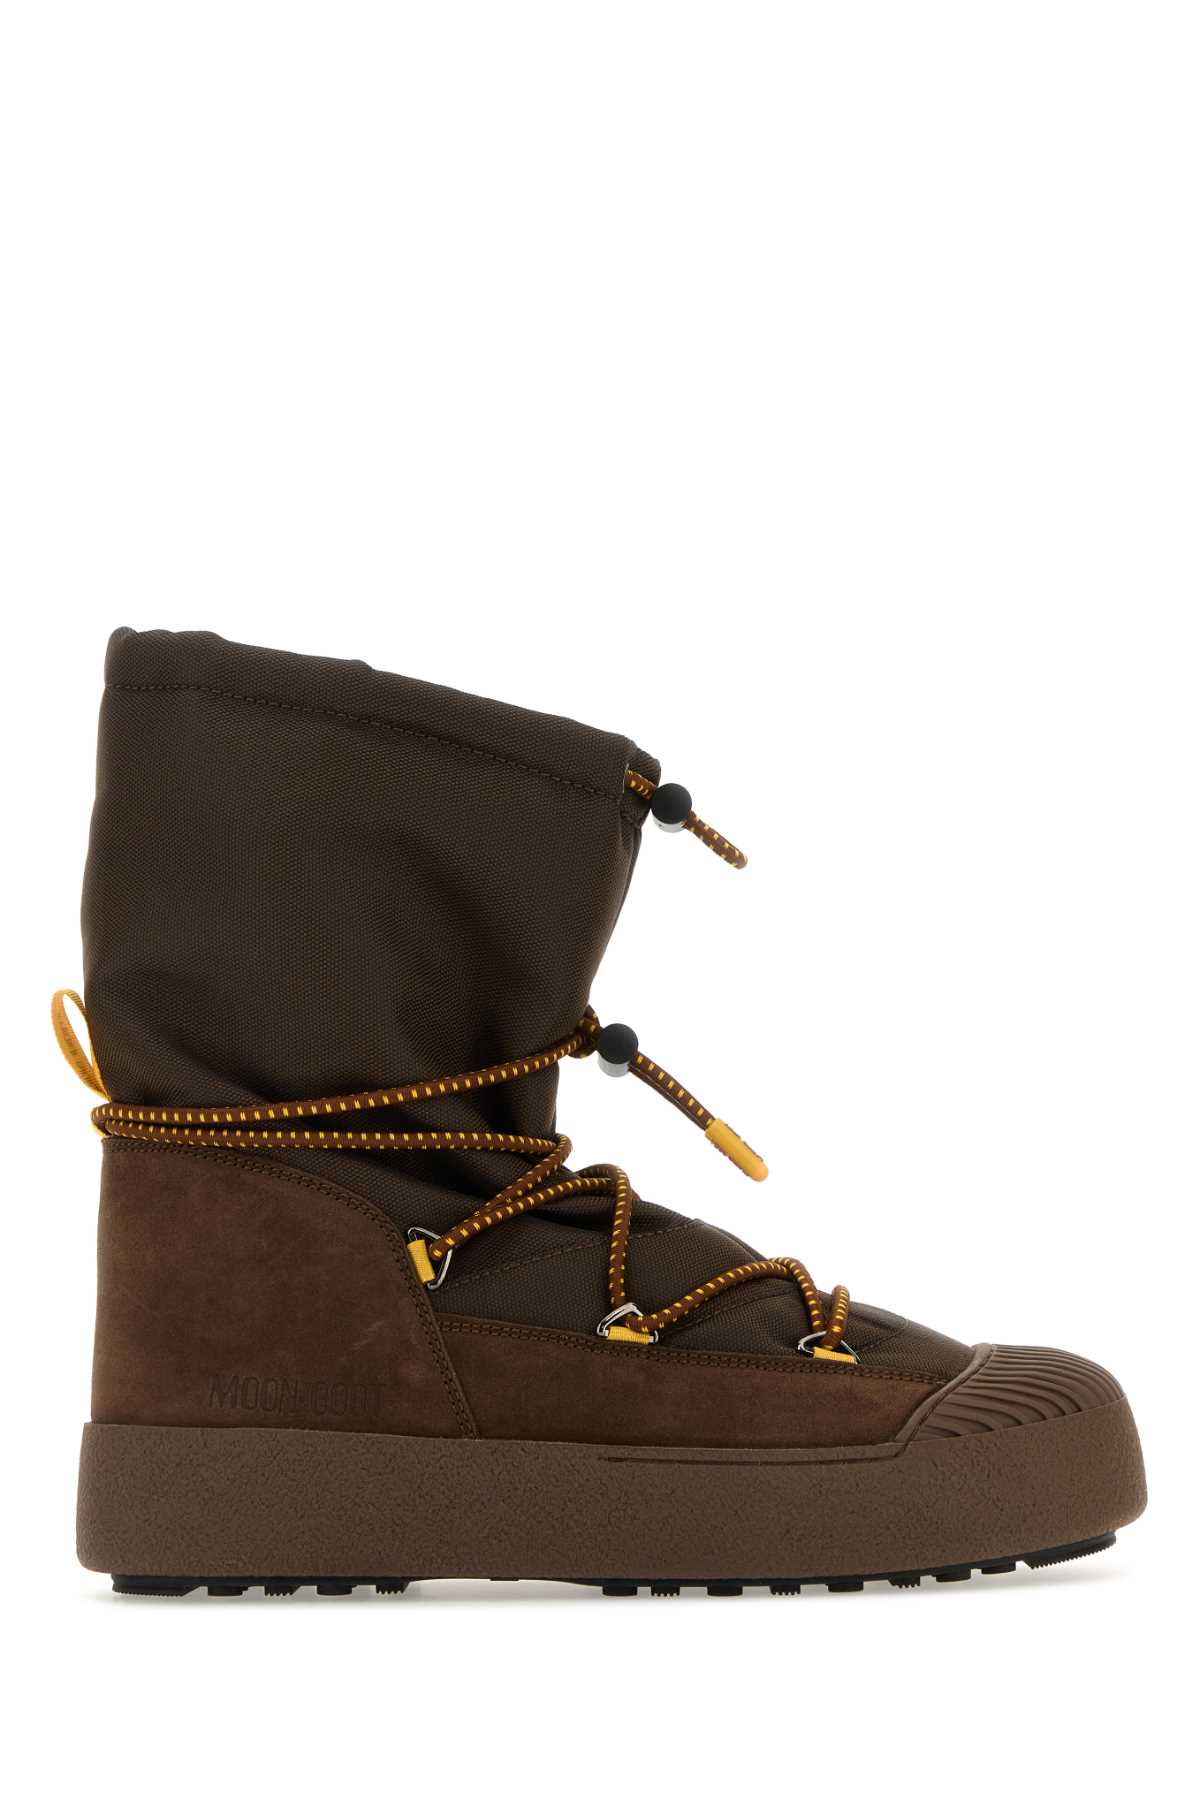 Brown Mtrack Polor Cordy Boots